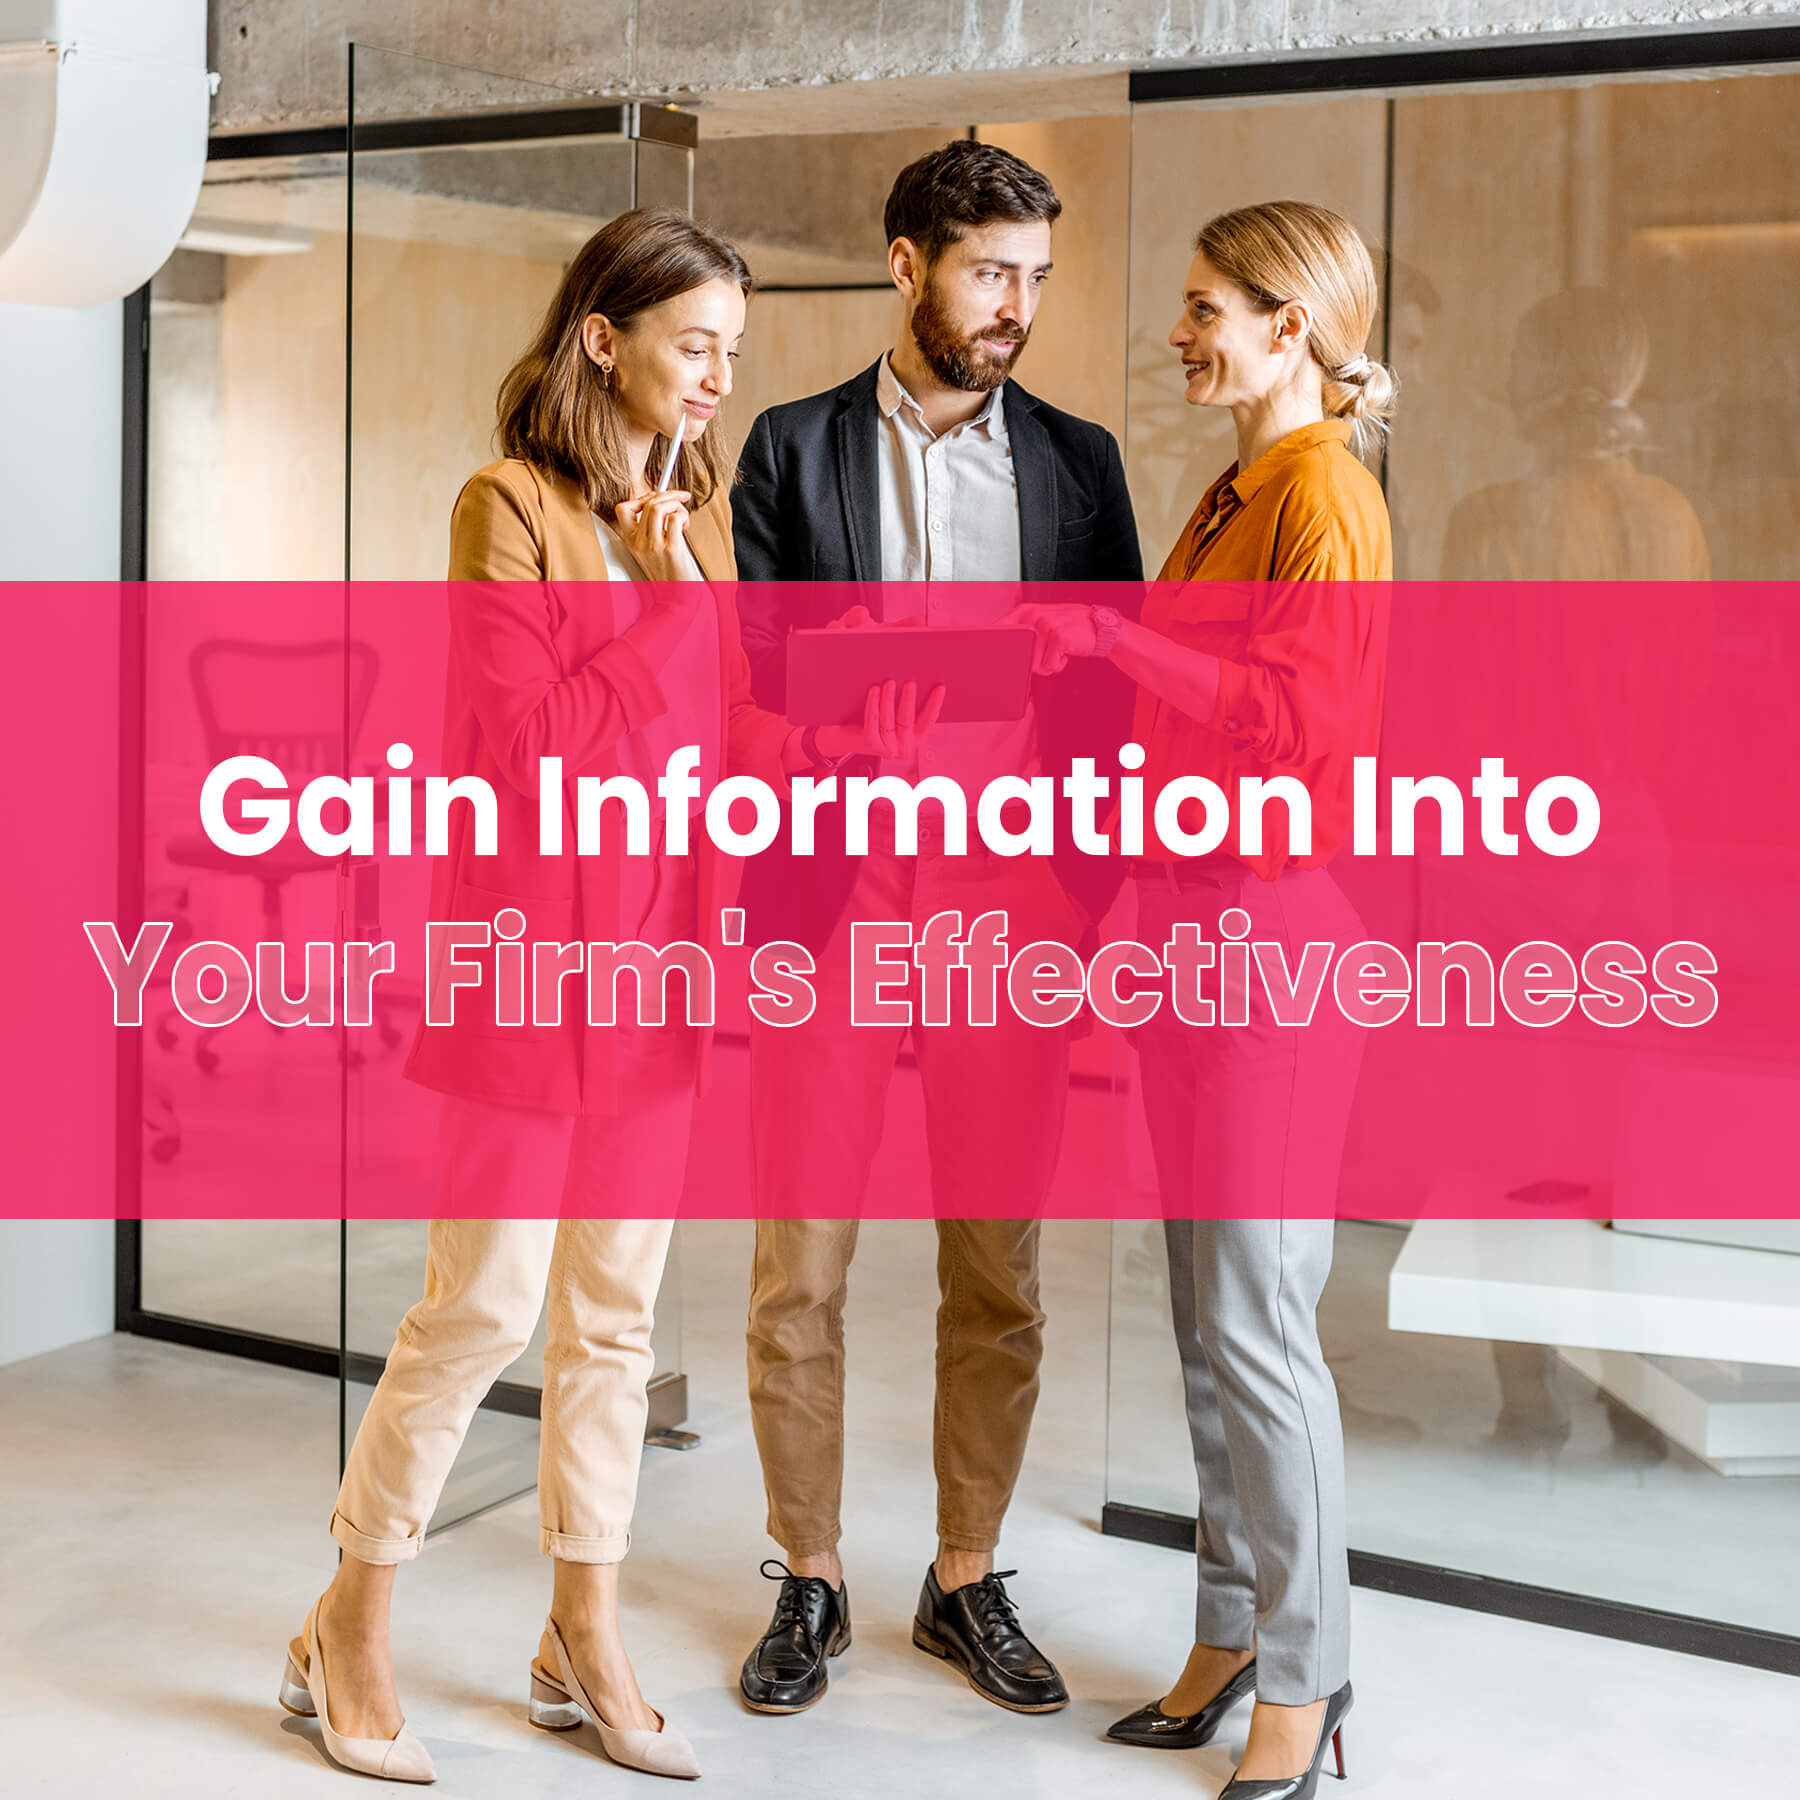 gain-information-into-your-firm's-effectiveness